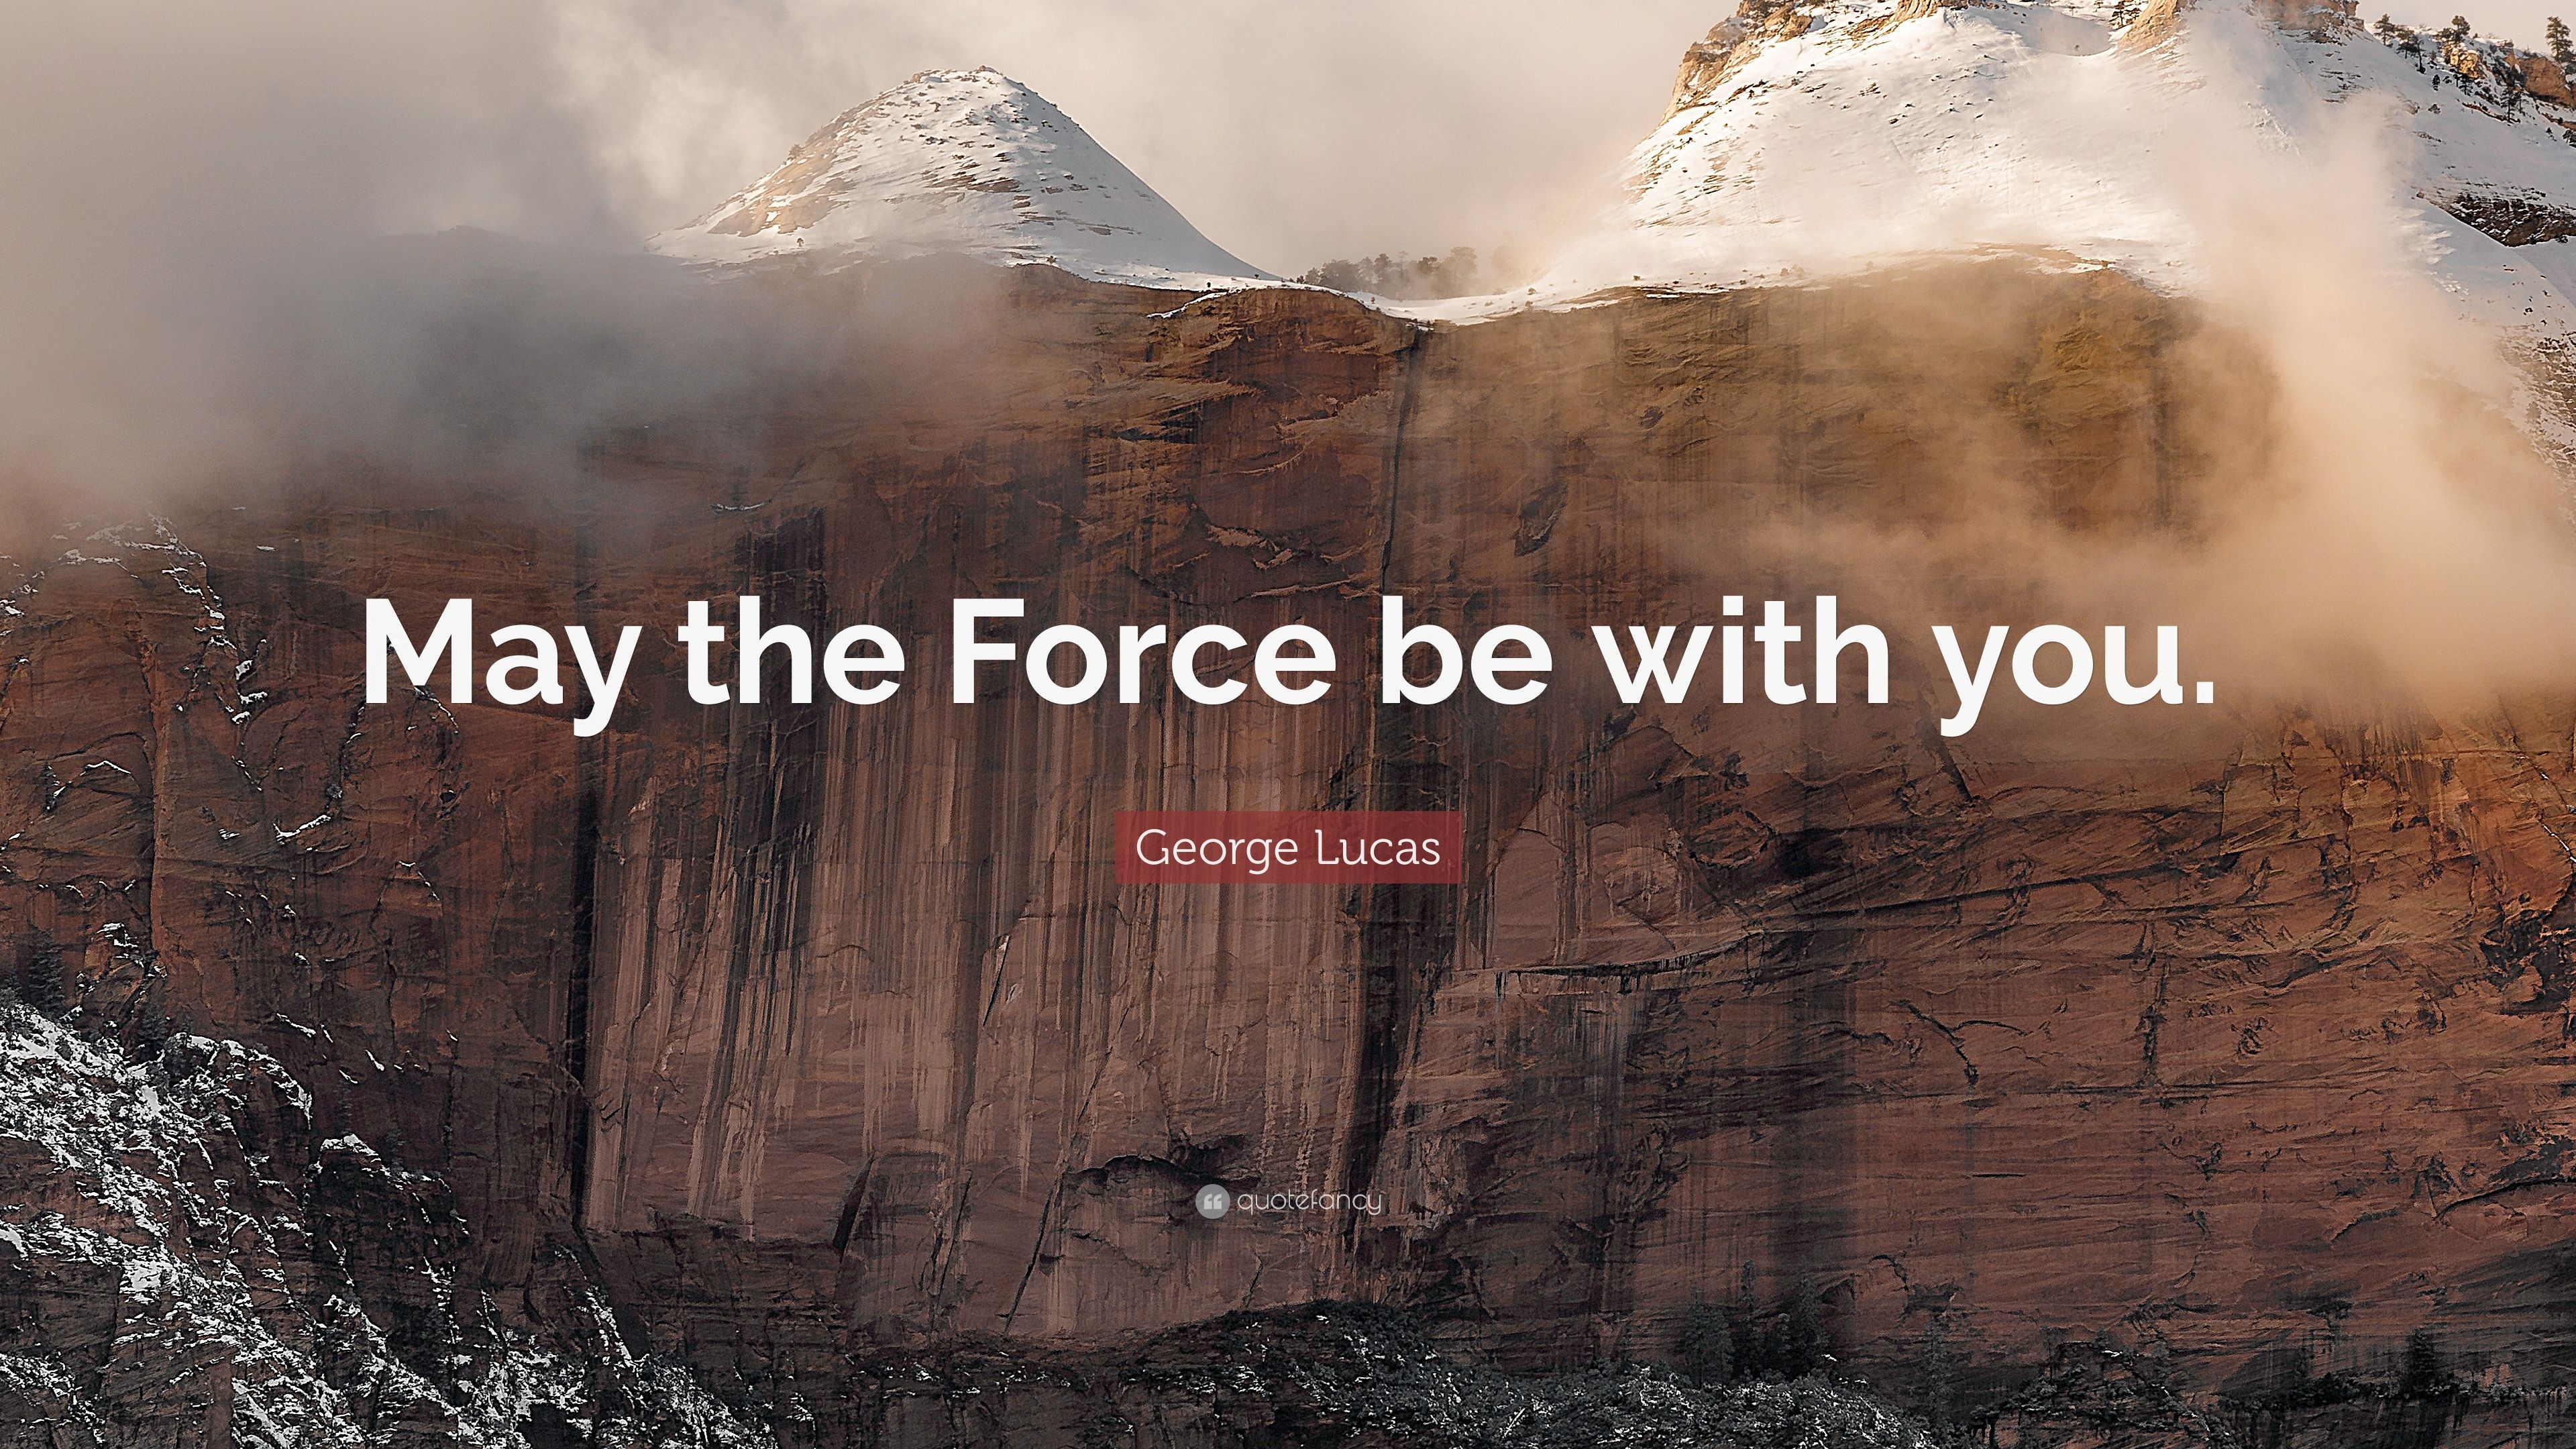 George Lucas Quote: “May the Force be with you.” (11 wallpaper)